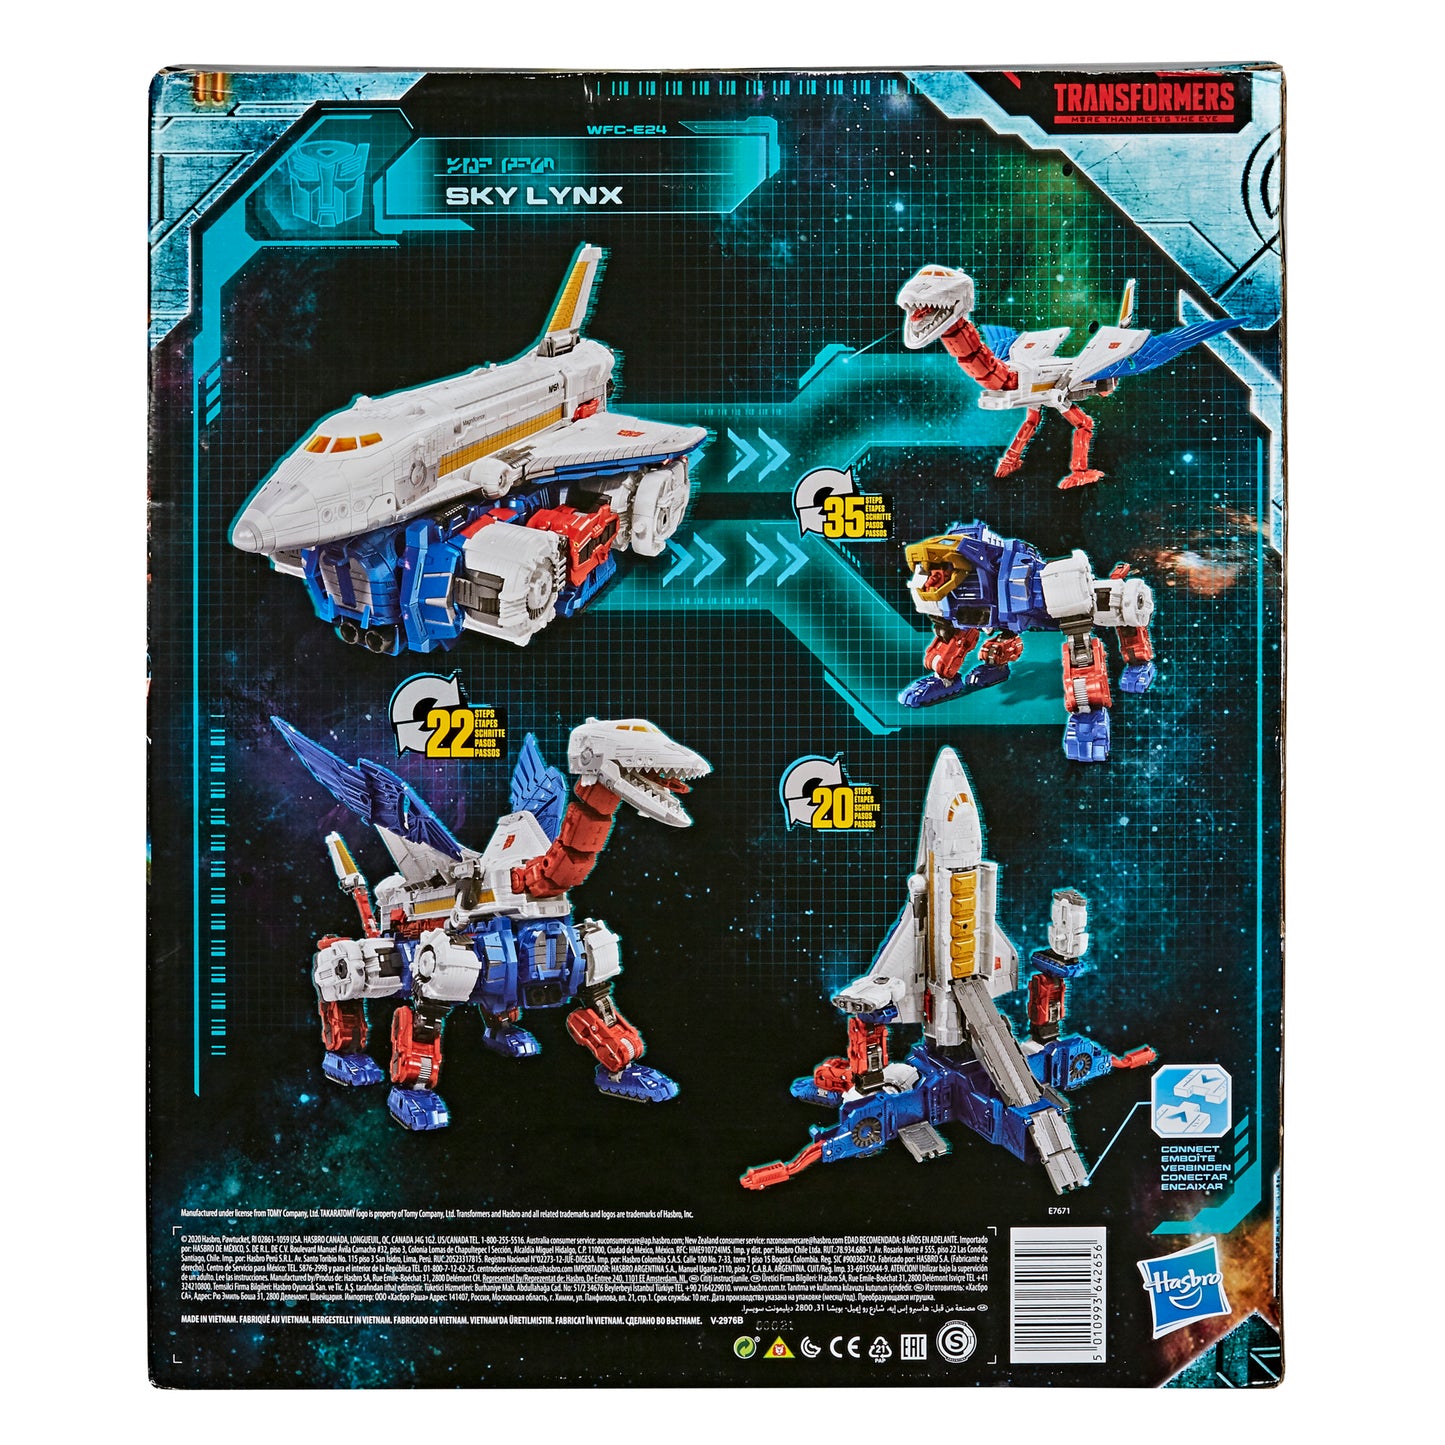 Transformers Toys Generations War for Cybertron: Earthrise Leader WFC-E24 Sky Lynx (5 Modes) Action Figure - Kids Ages 8 and Up, 11-inch - Heretoserveyou